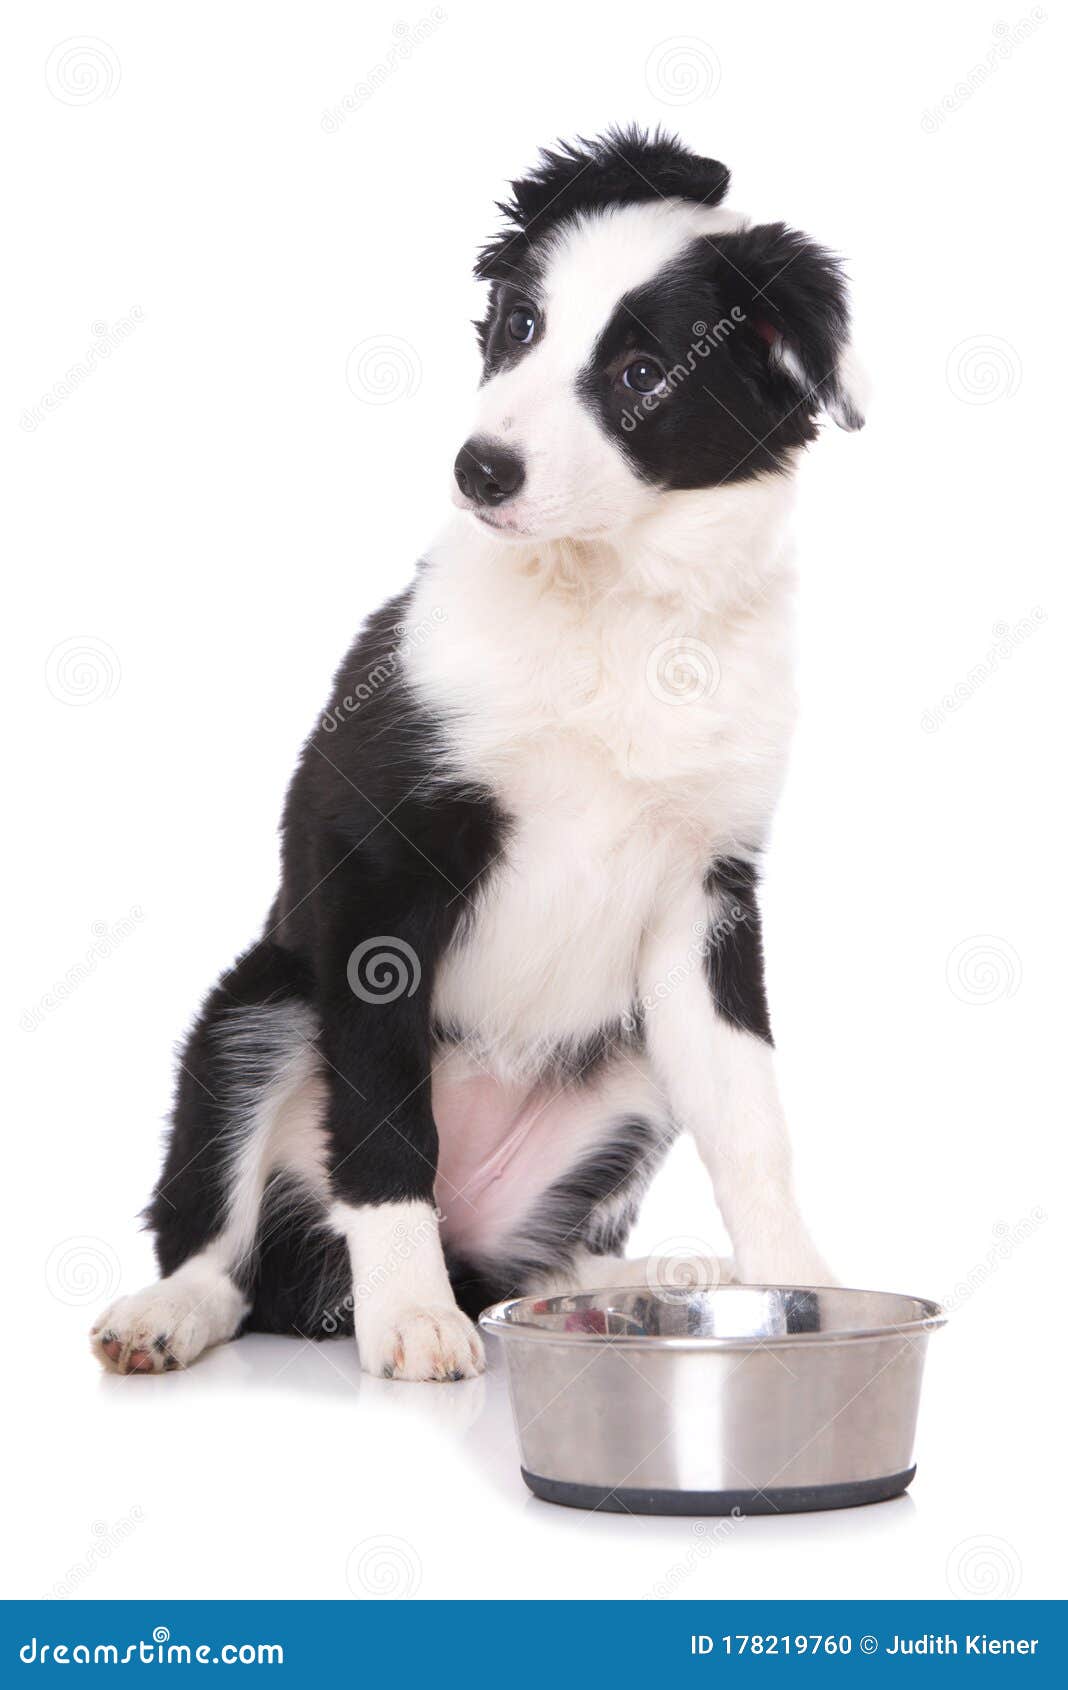 Cute Border Collie Puppy With A Food Bowl Stock Photo